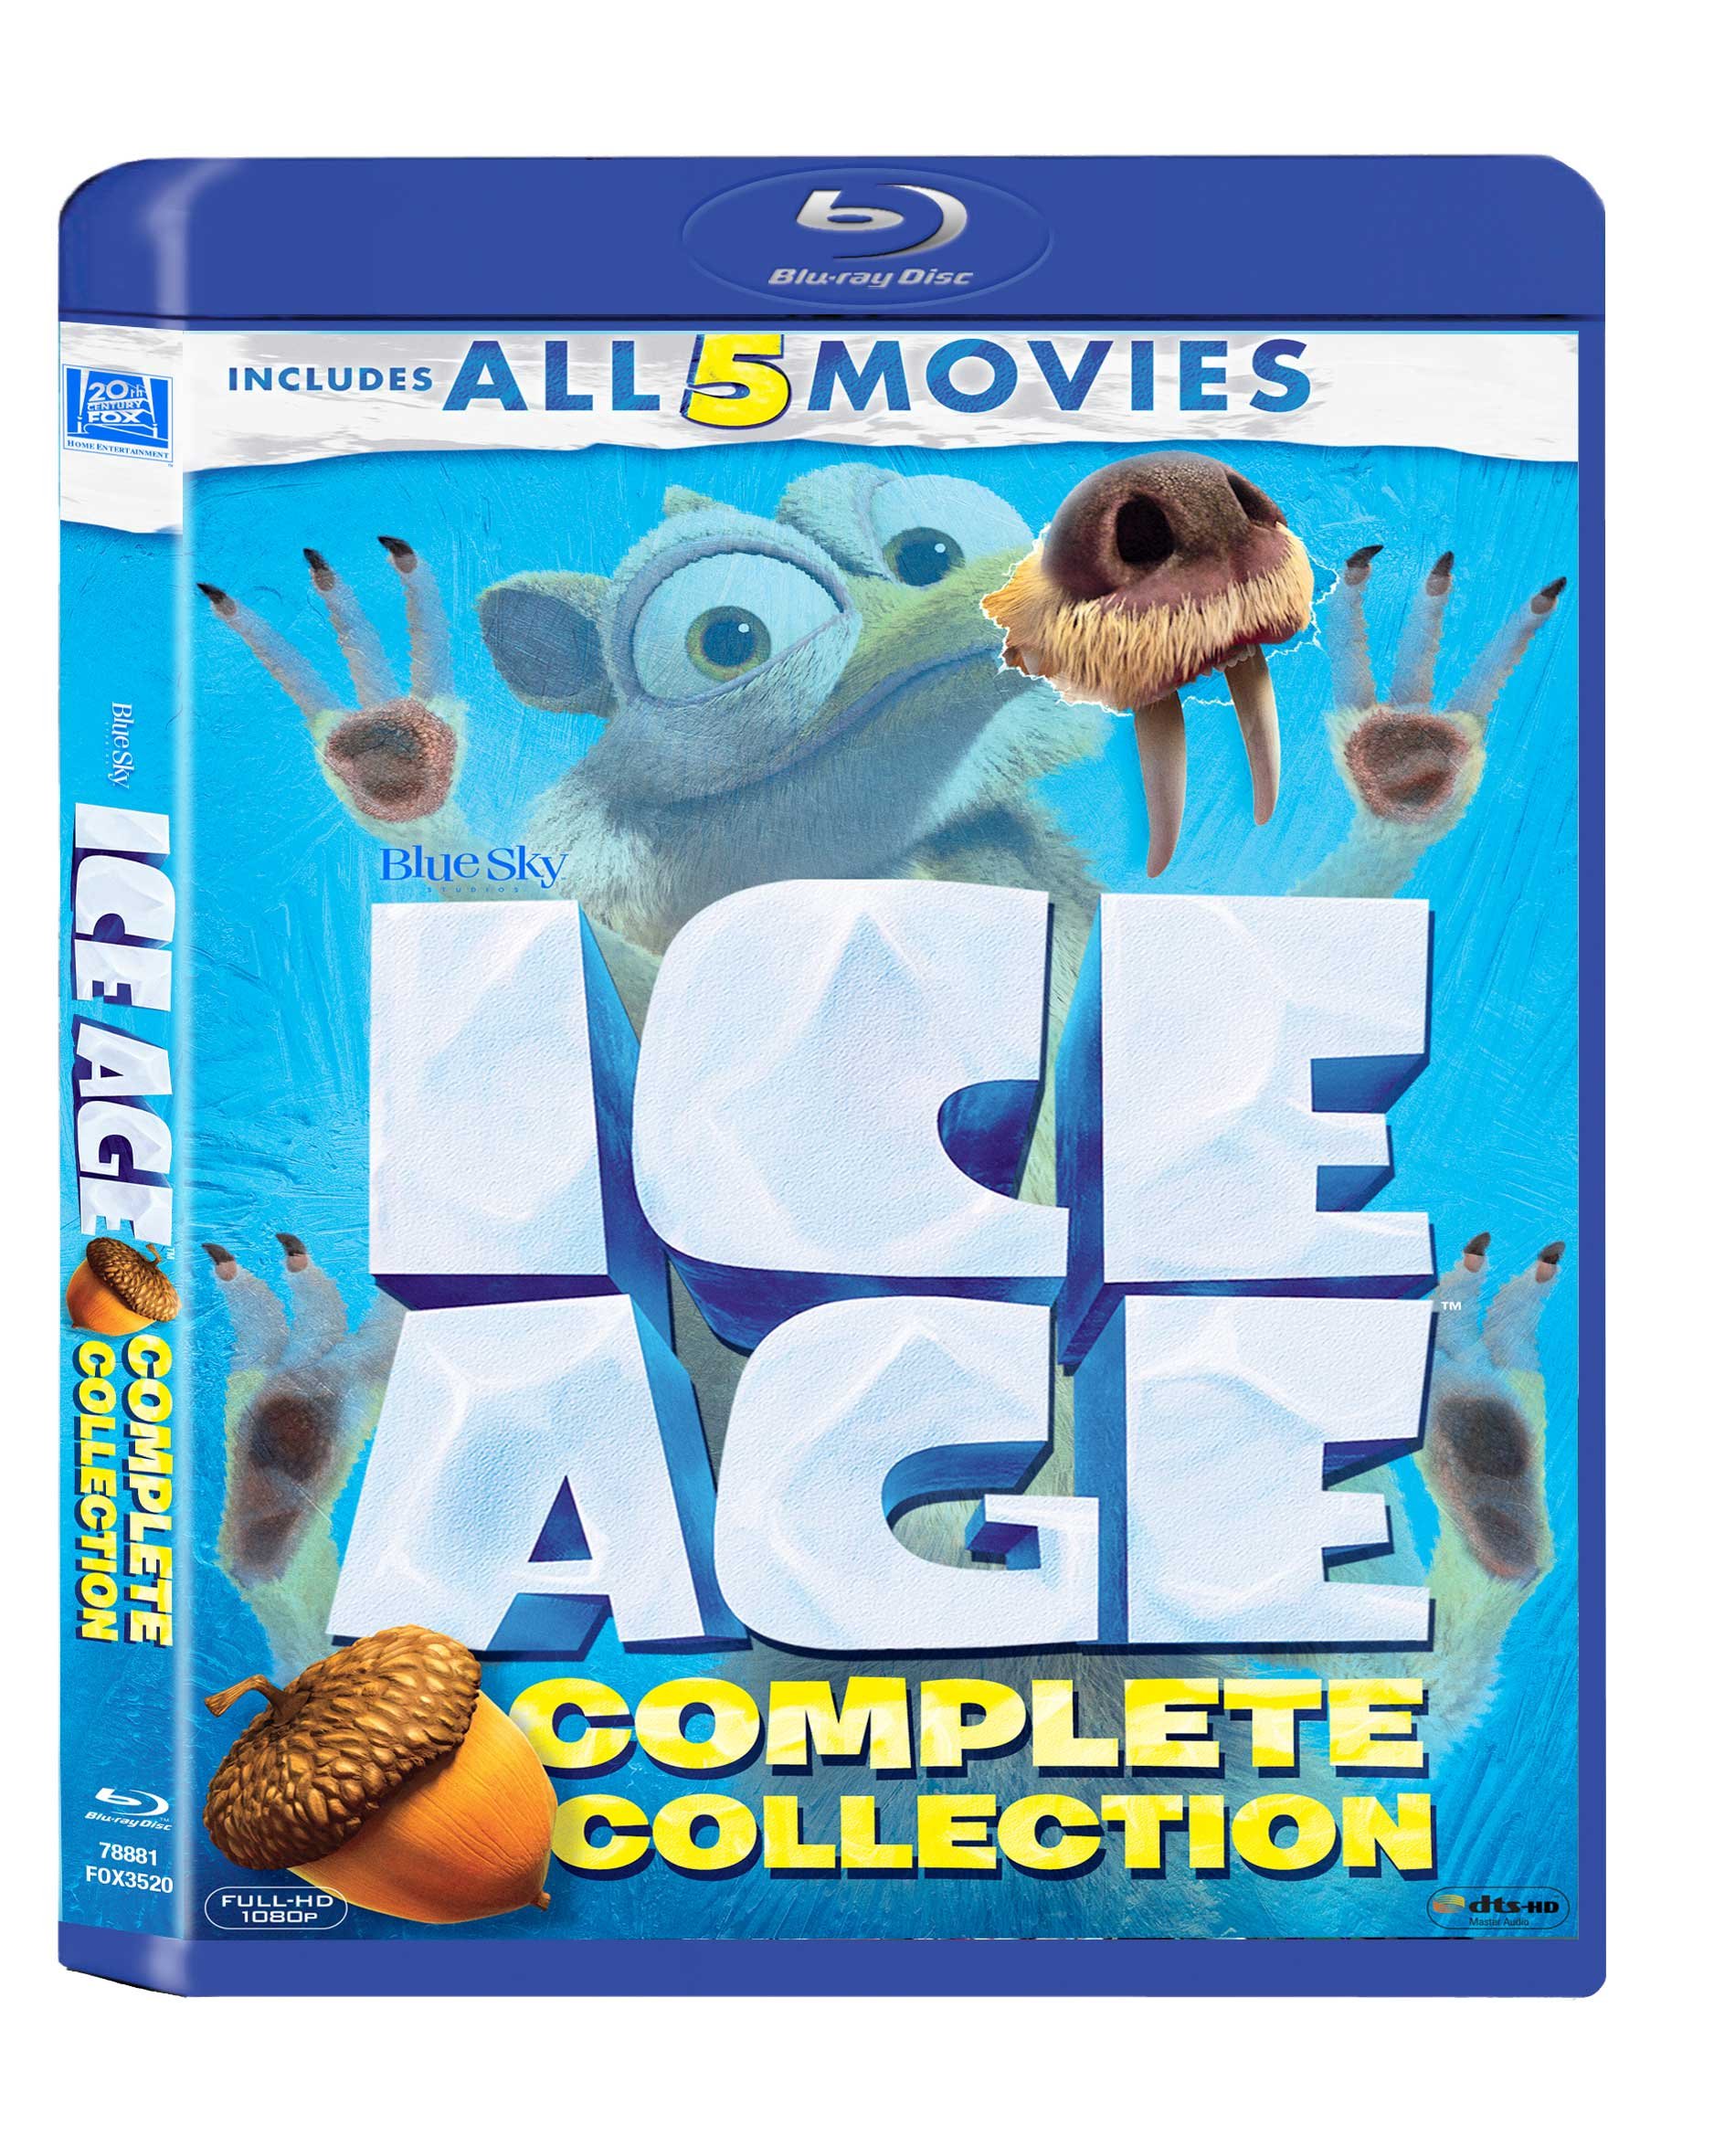 ice-age-the-complete-5-movies-collection-ice-age-ice-age-2-the-meltdown-ice-age-3-dawn-of-dinosaurs-ice-age-4-continental-drift-ice-age-5-collision-course-5-disc-box-set